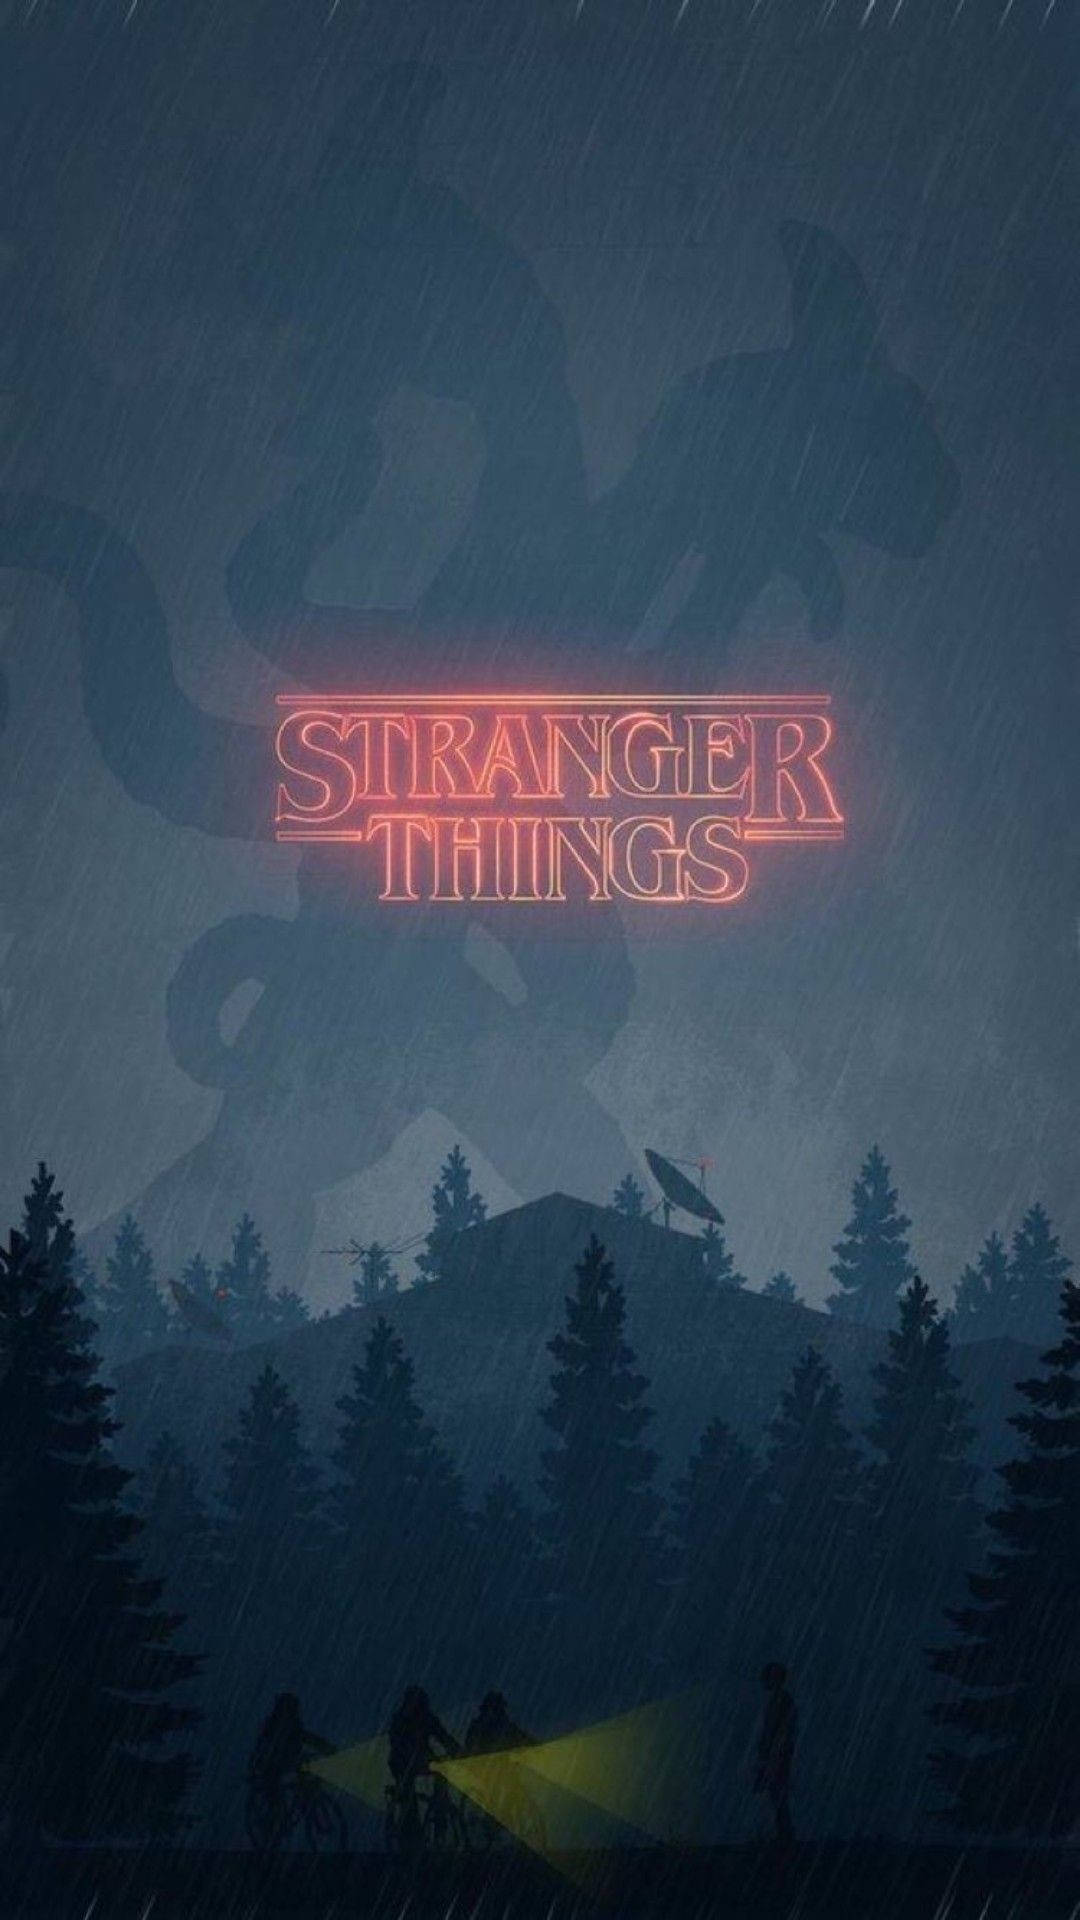 Make the world of Stranger Things come alive with your mobile phone Wallpaper